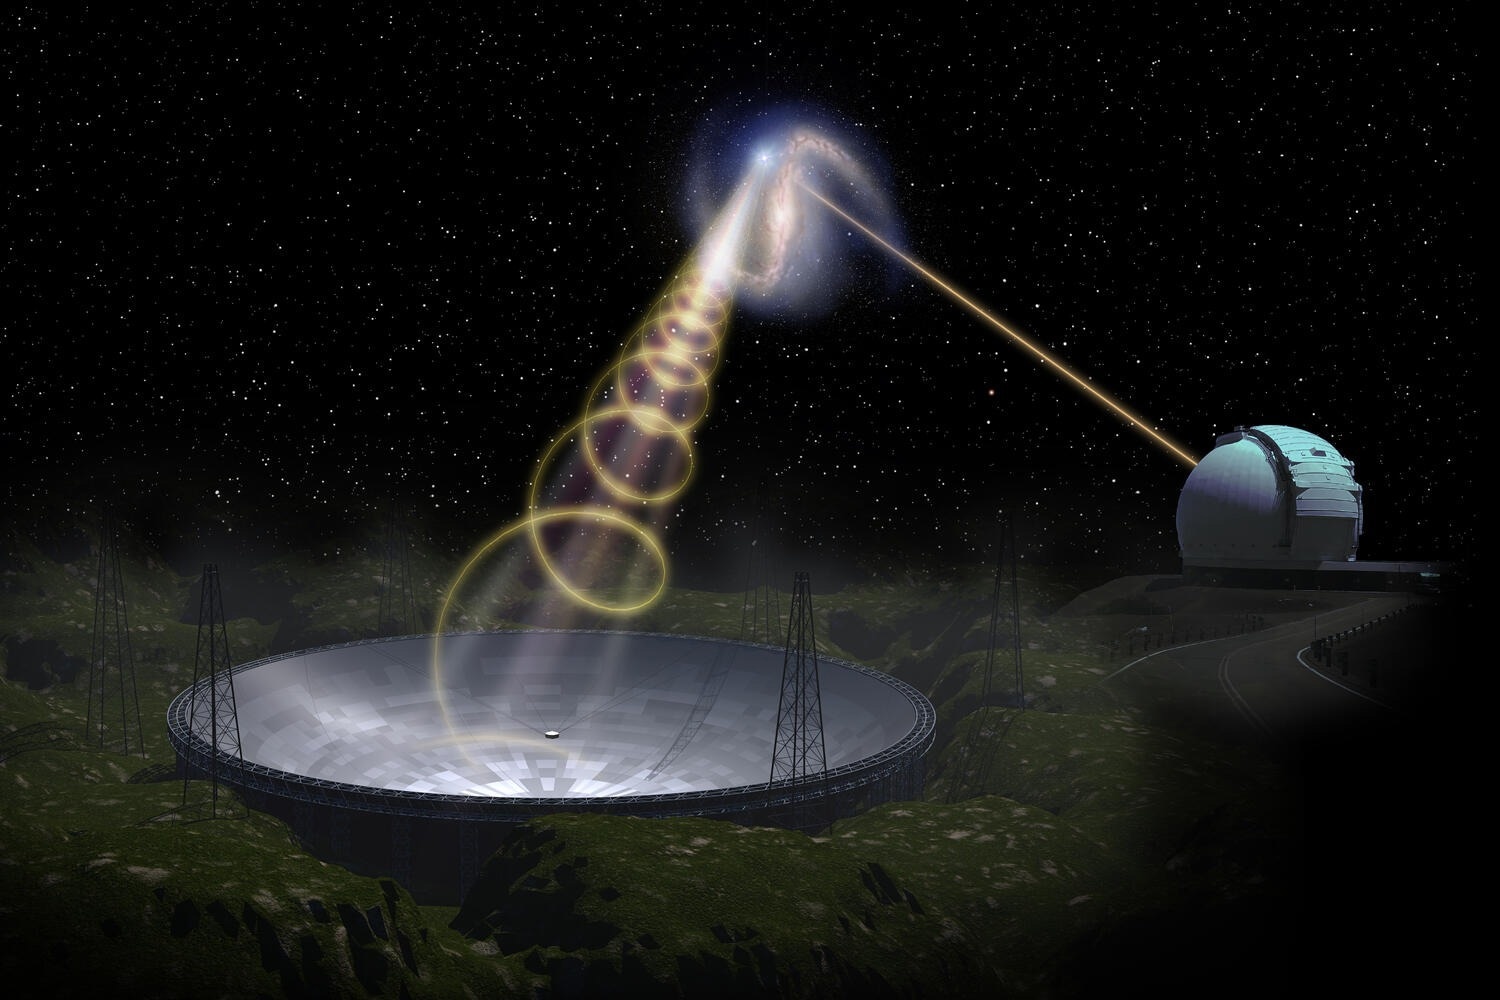 Mysterious Features of Fast Radio Bursts Disclosed